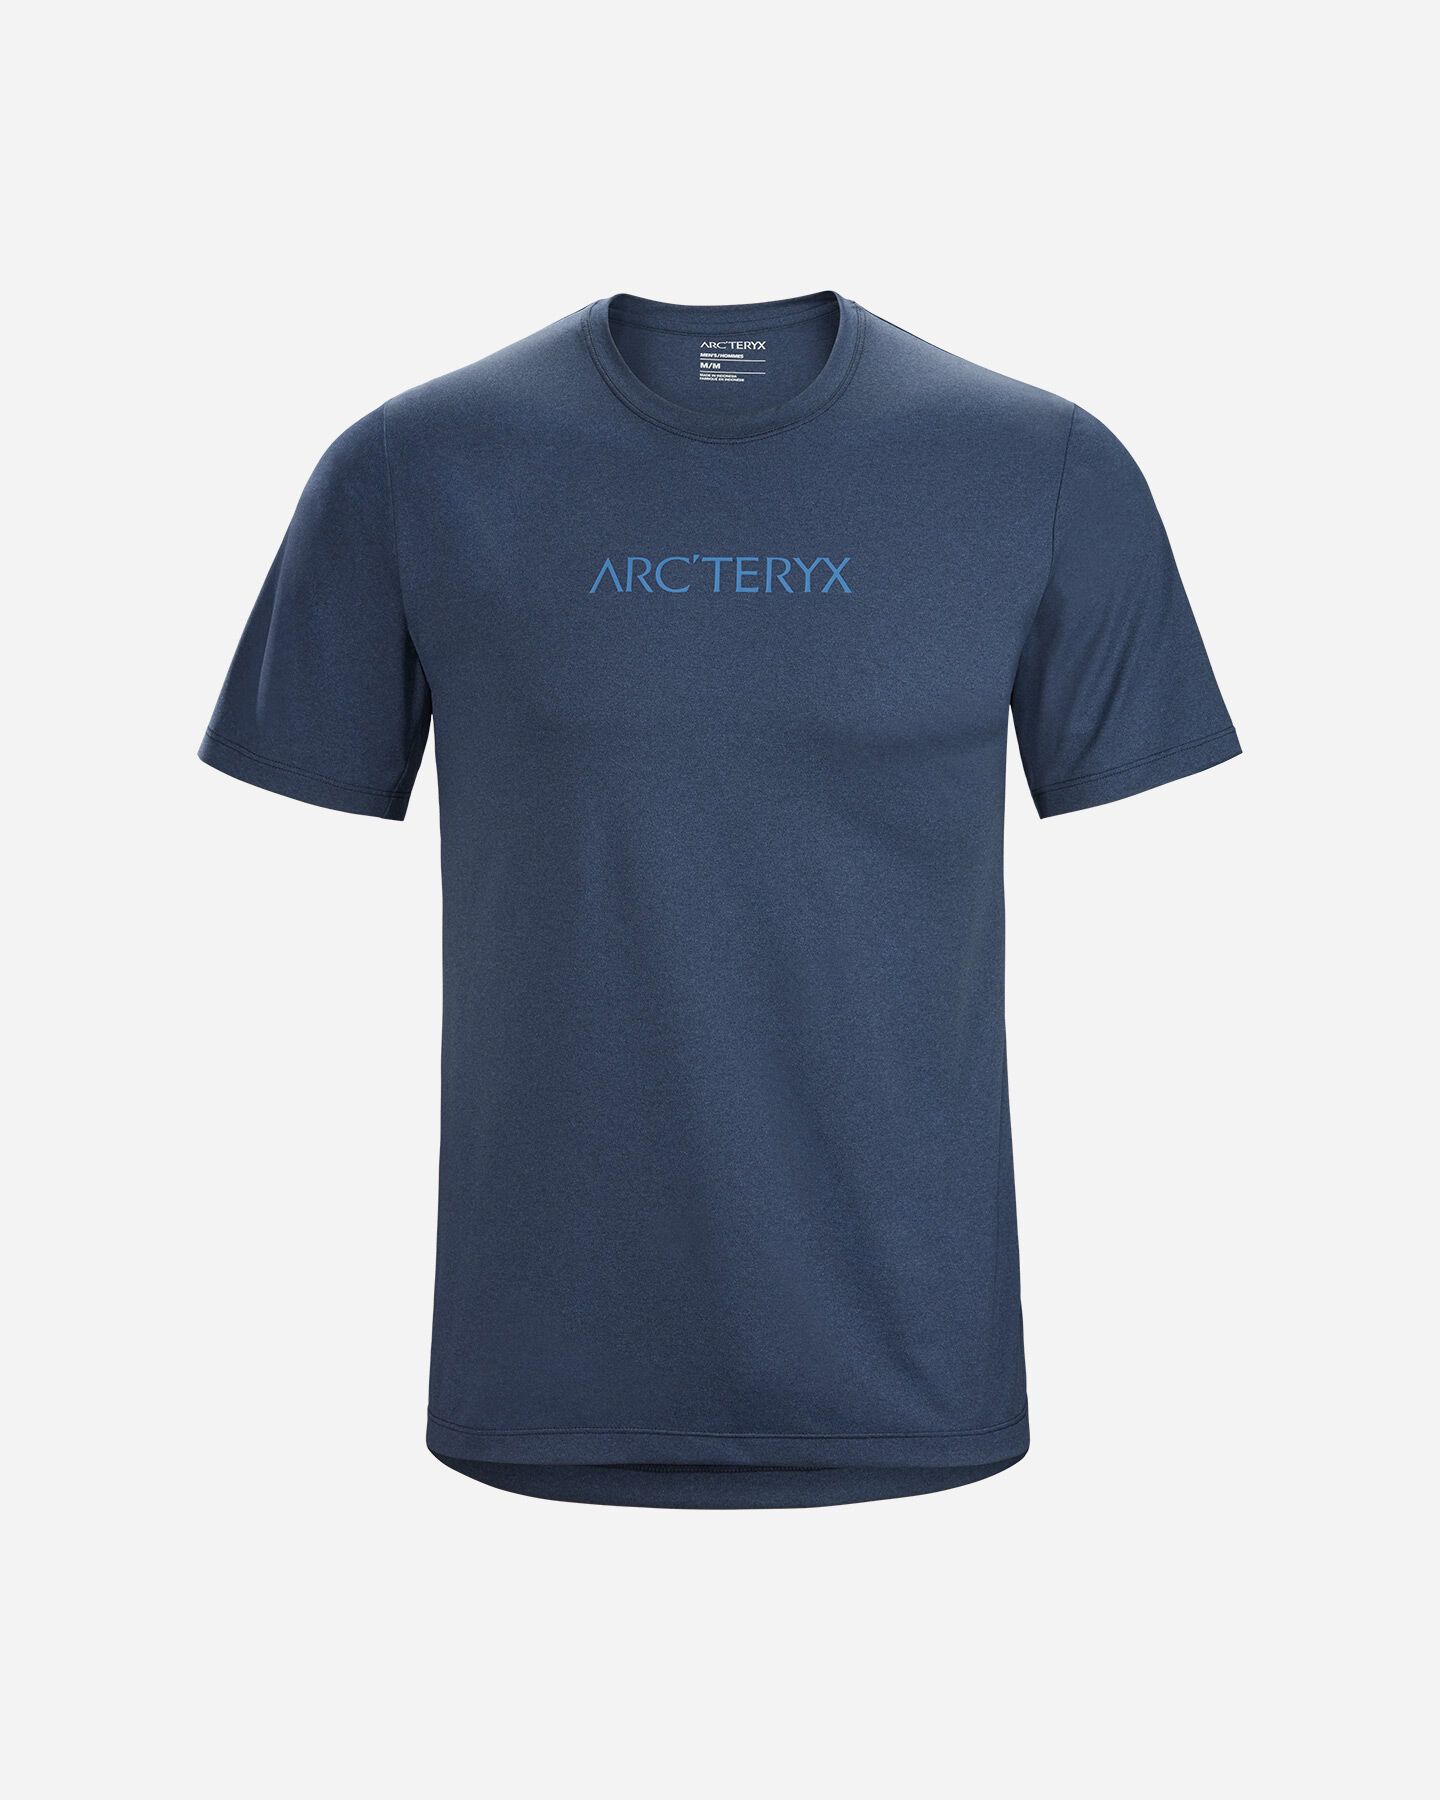  T-Shirt ARC'TERYX REMIGE WORD M S4075197|1|S scatto 0